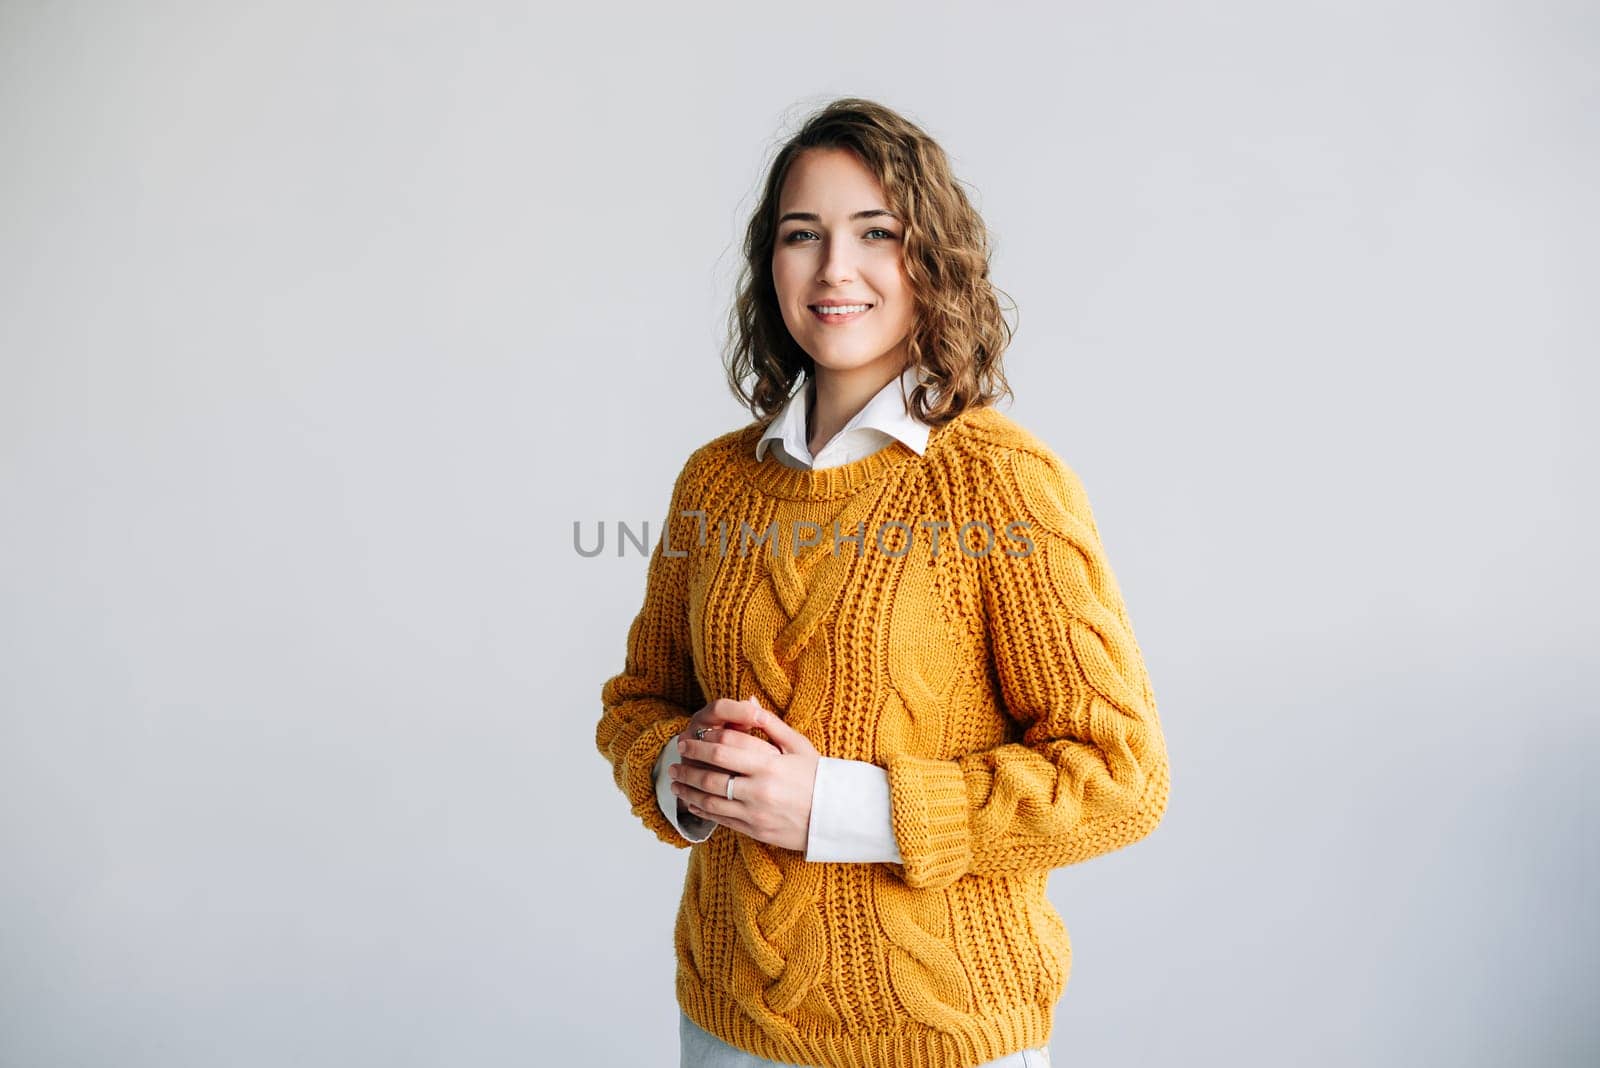 Joyful Professional Woman: Smiling, Beautiful, and Charming Model - Positive, Cheerful, and Pretty - Curly-haired Student Looks at Camera - Isolated Portrait - Confident and Vibrant Expression.